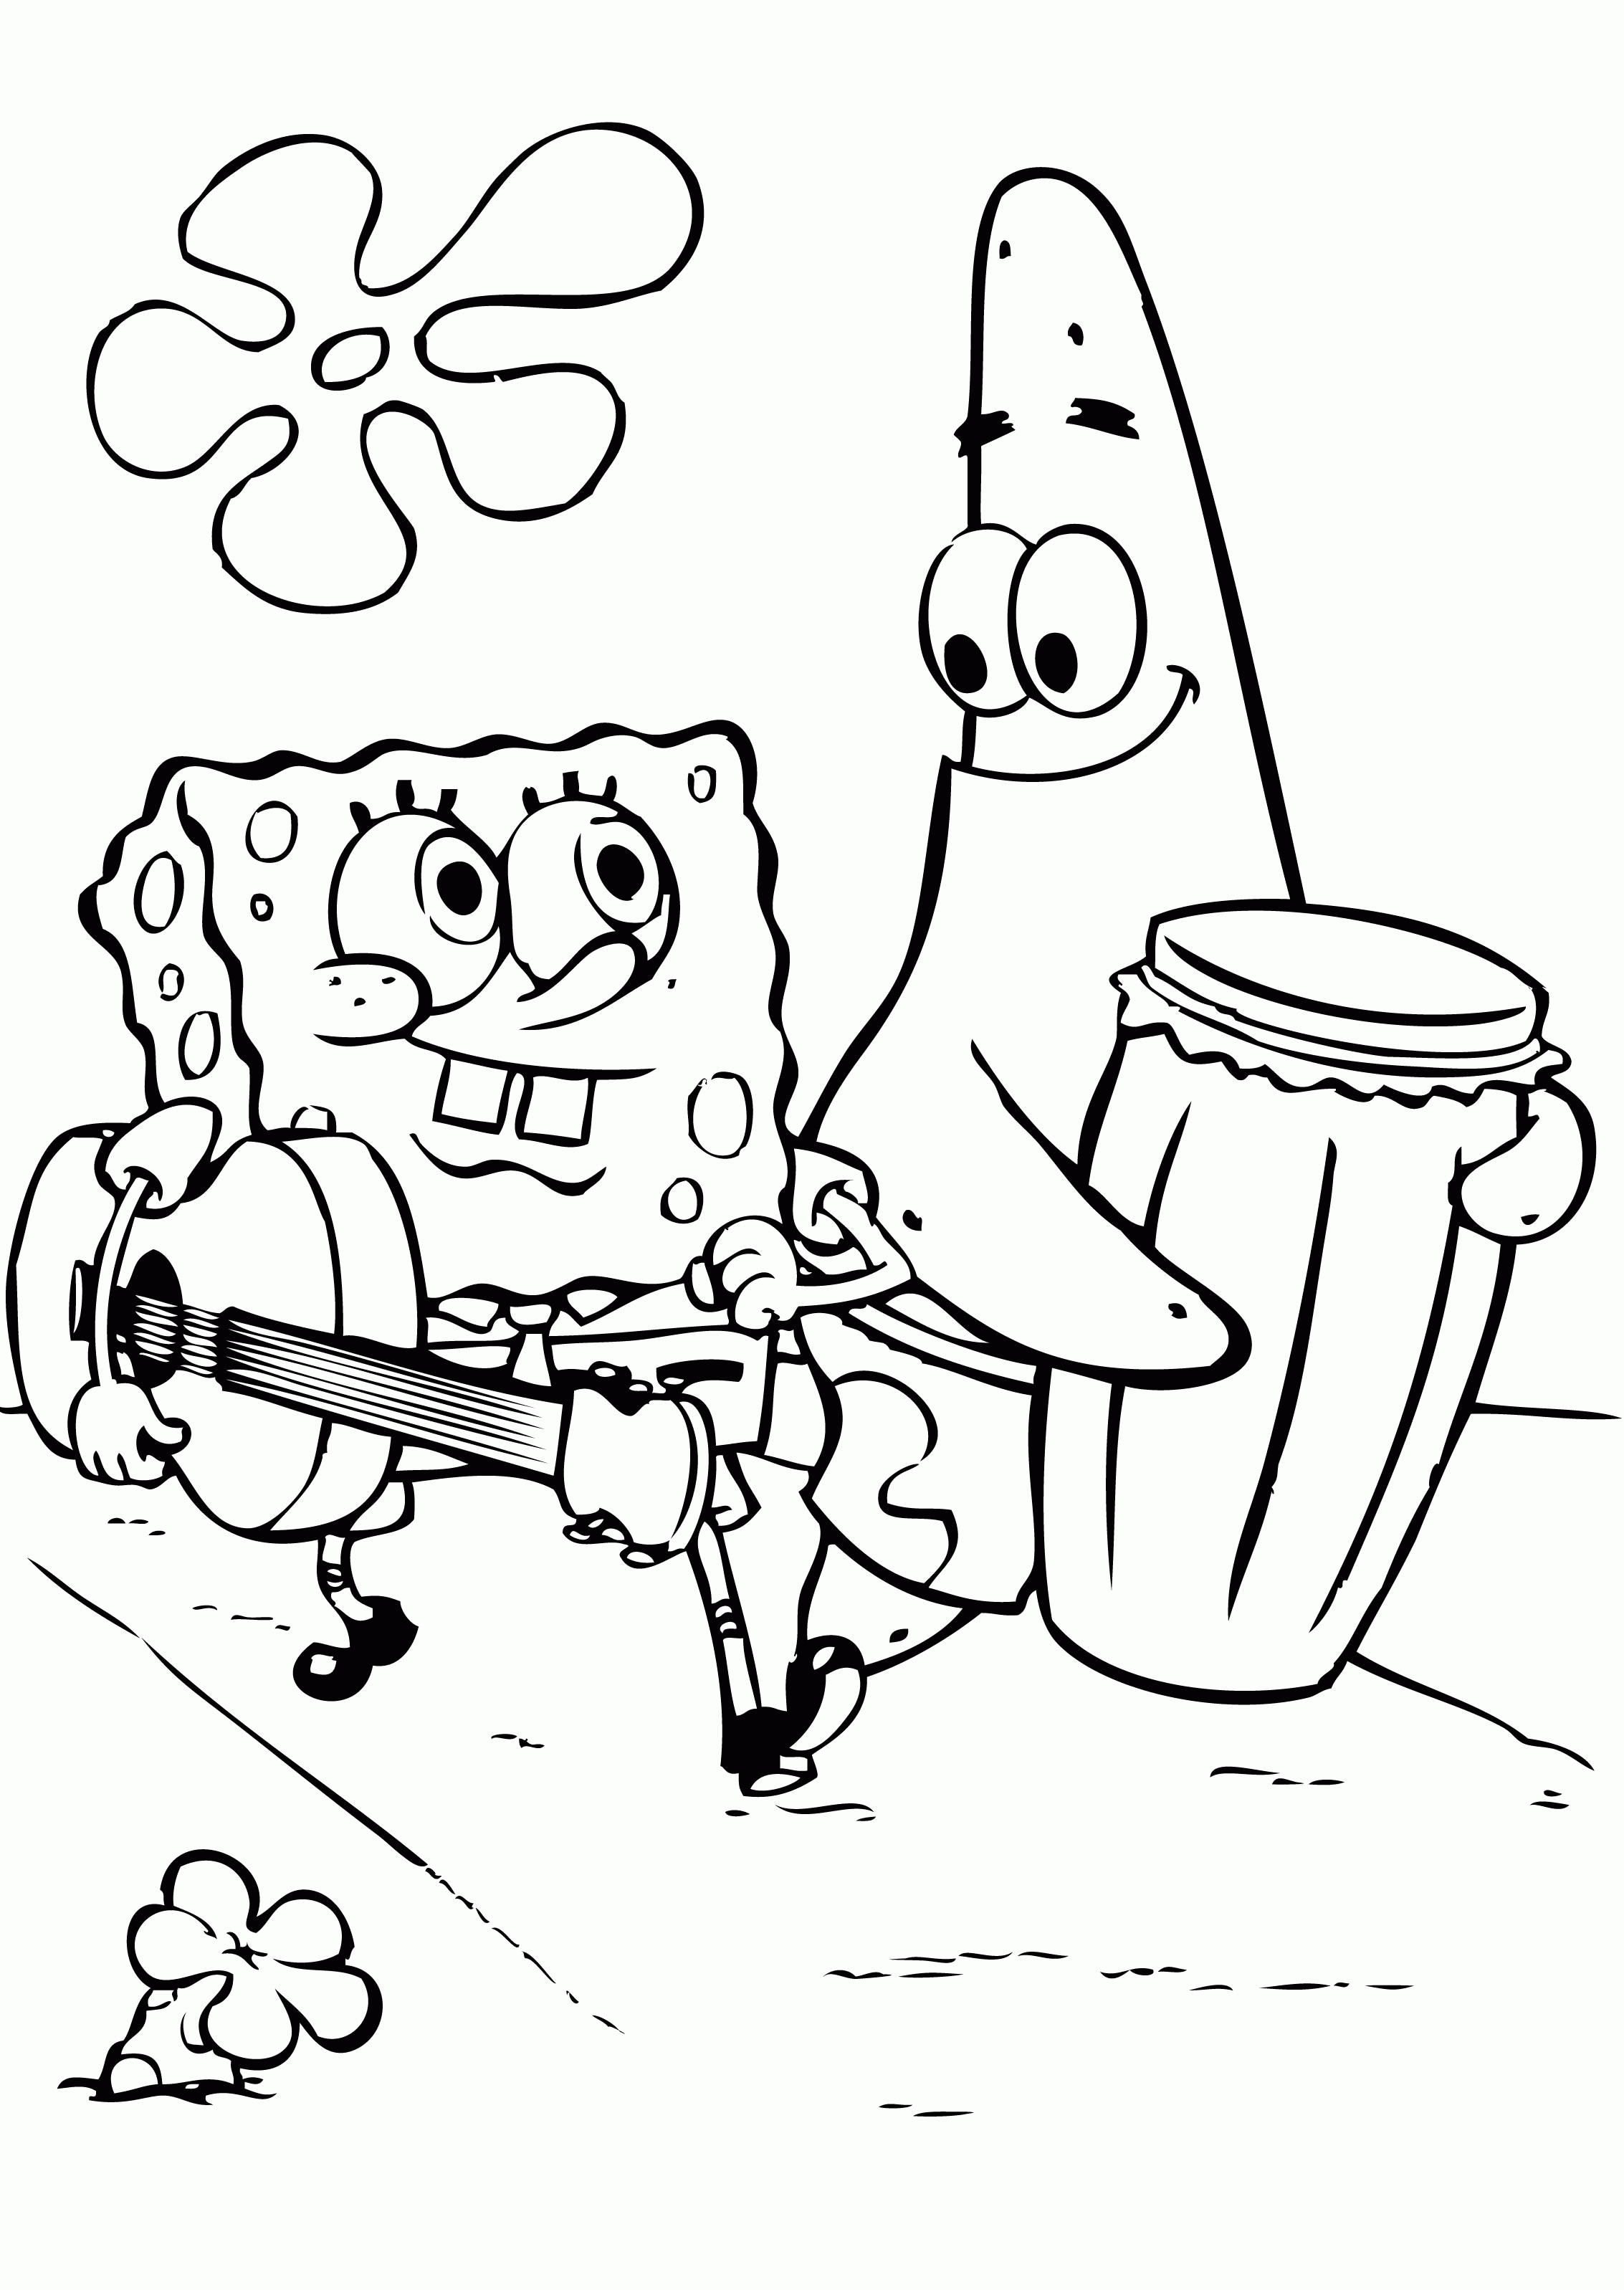 nickelodeon color pages | High Quality Coloring Pages